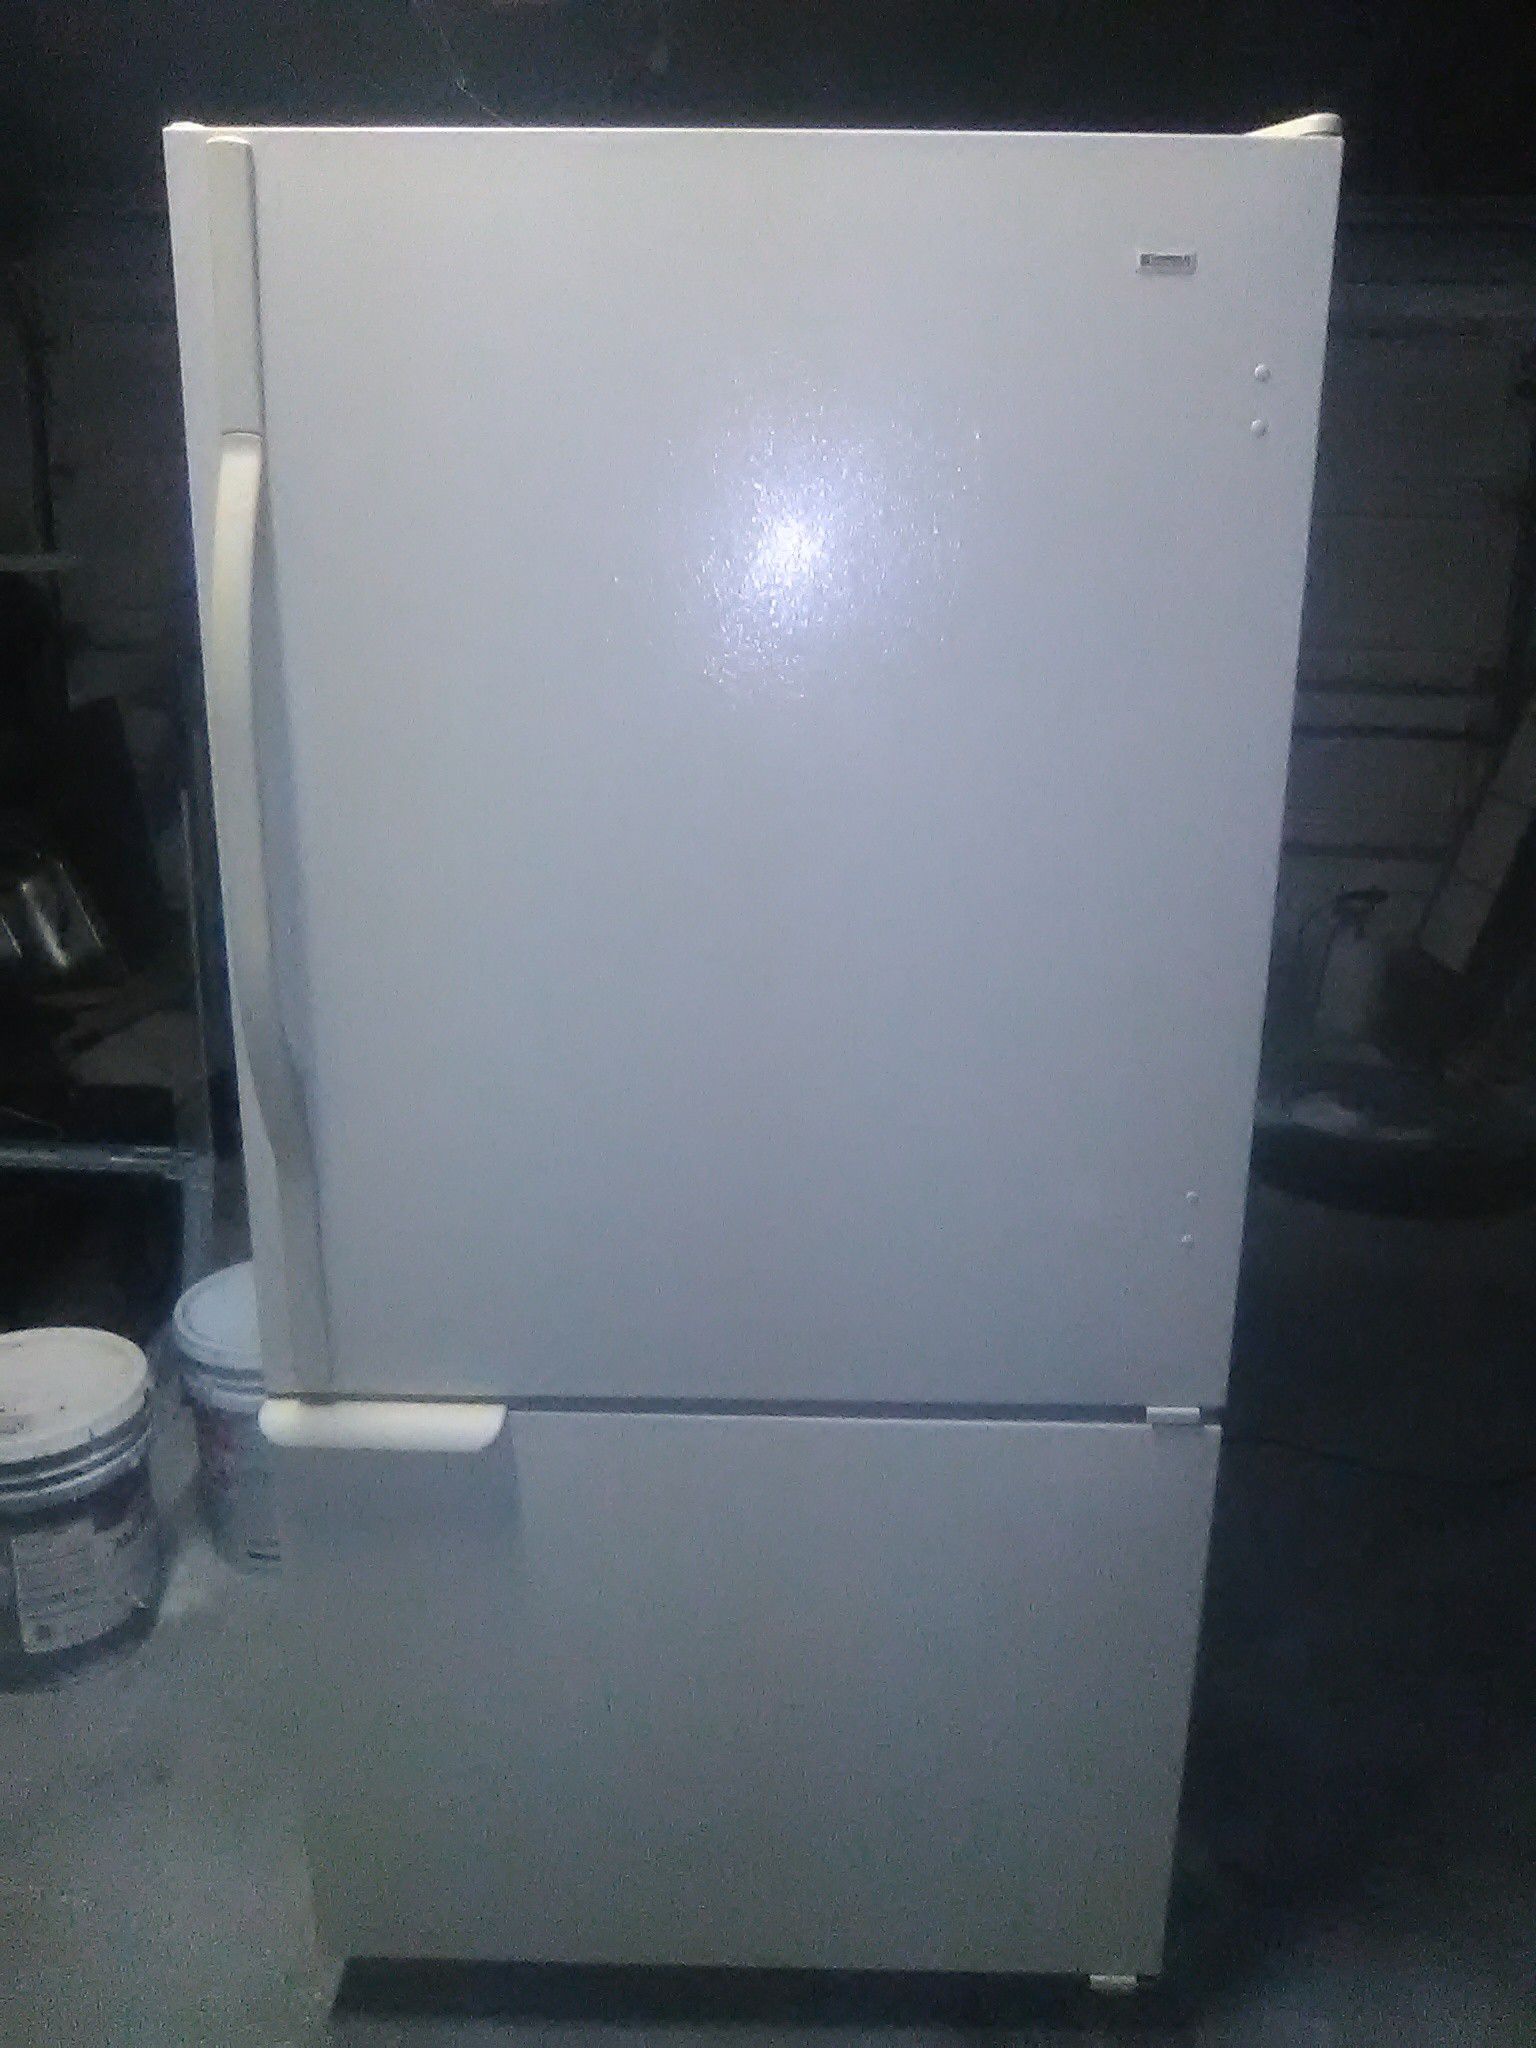 Bottom Freezer Fridge Clean, Plugged In,Works Great, Might Deliver